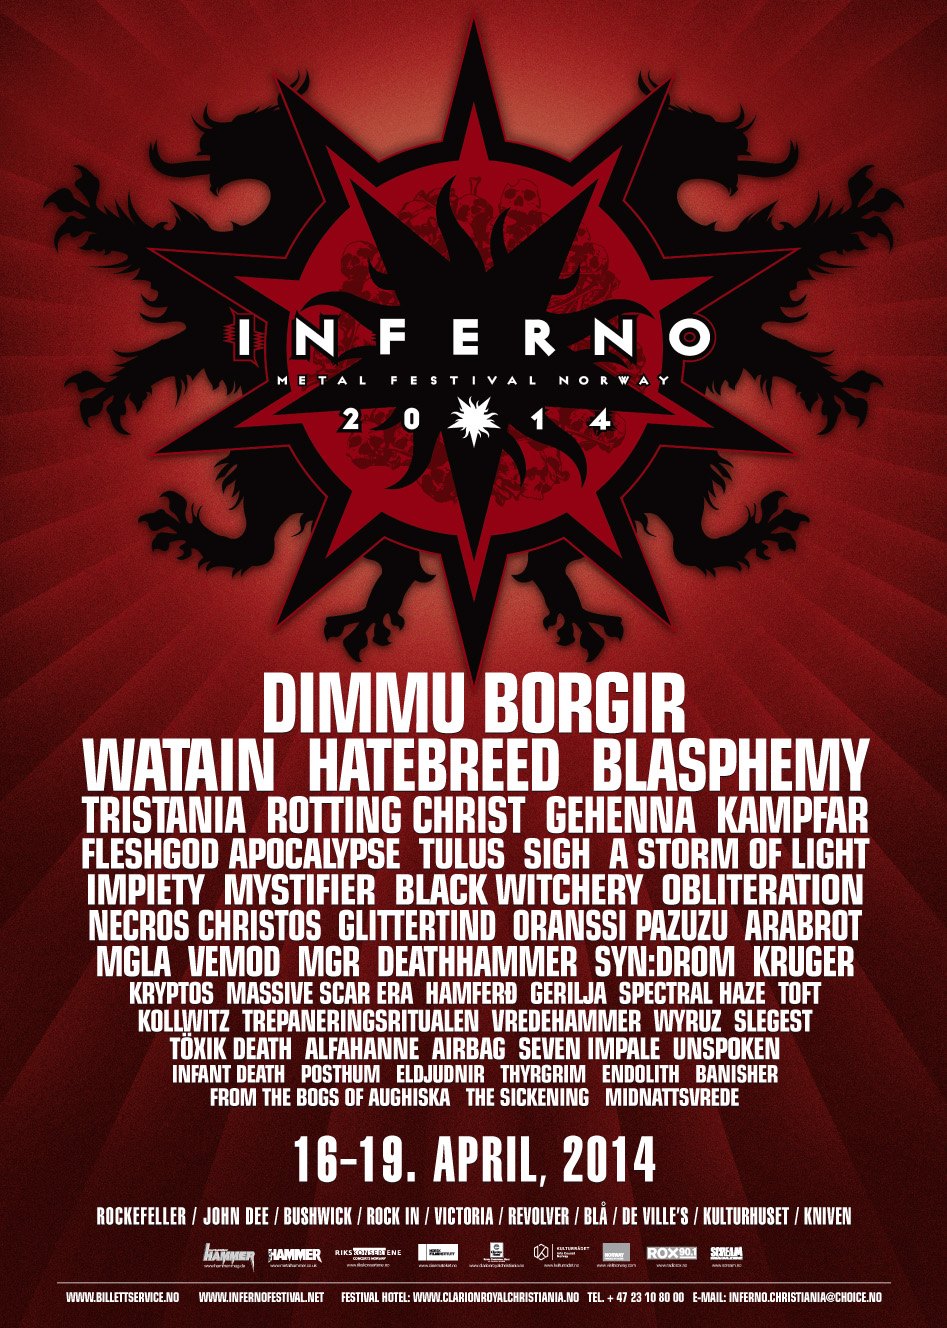 Inferno Festival Norway 2014 All Metal Festivals